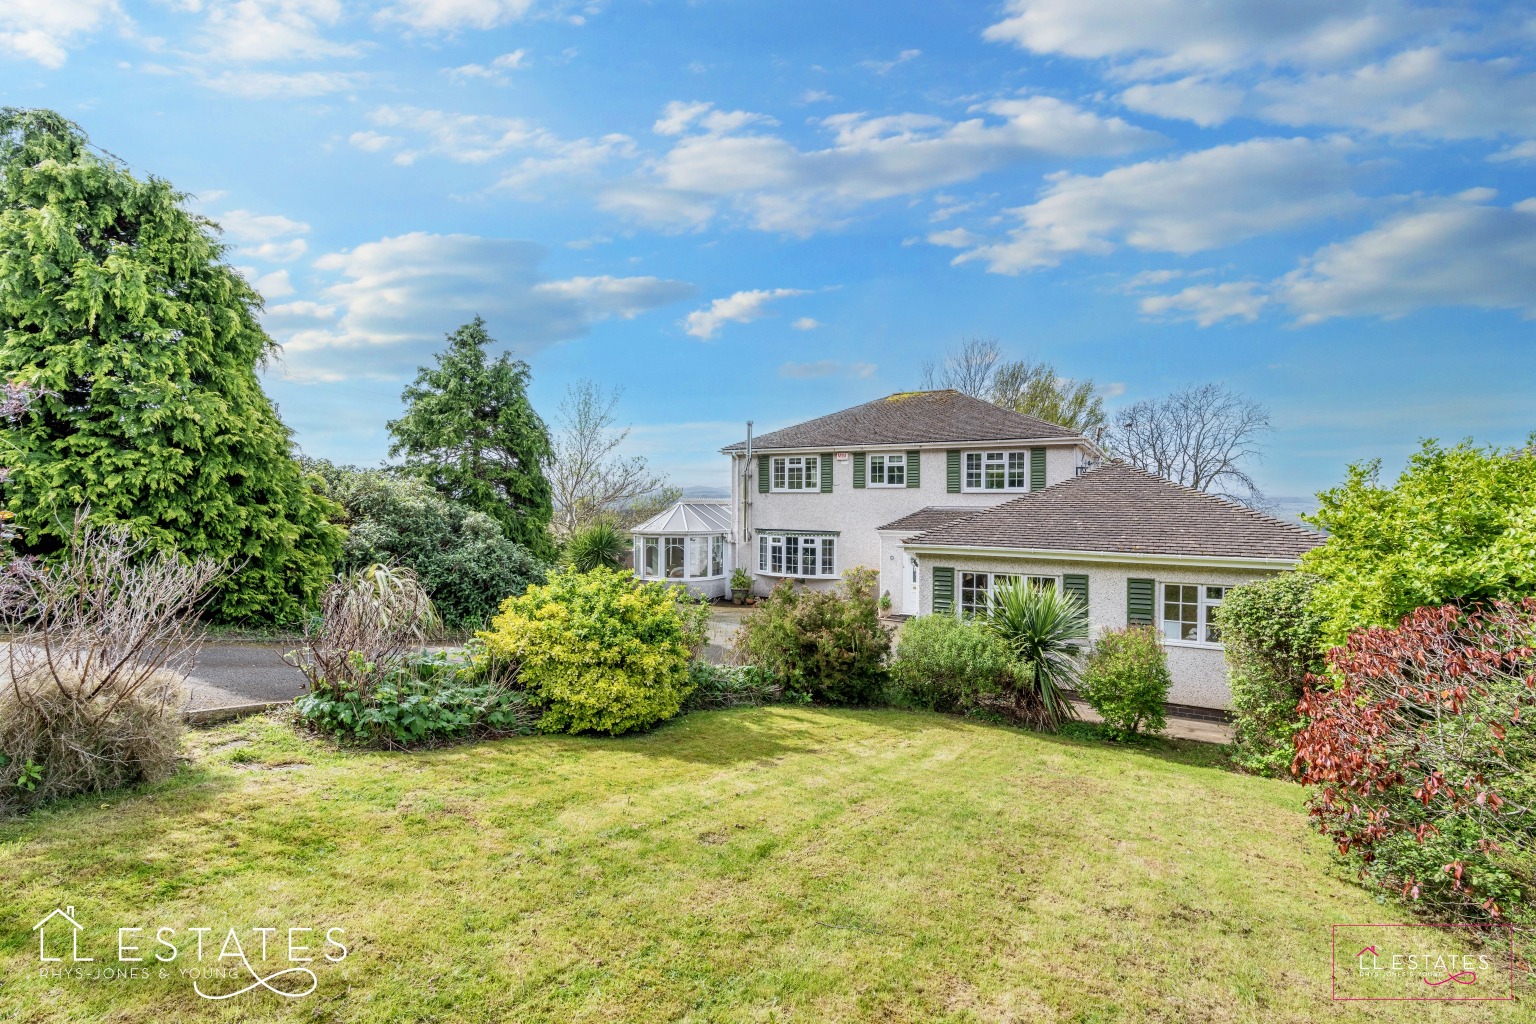 4 bed detached house for sale in Cwm Road - Property Image 1